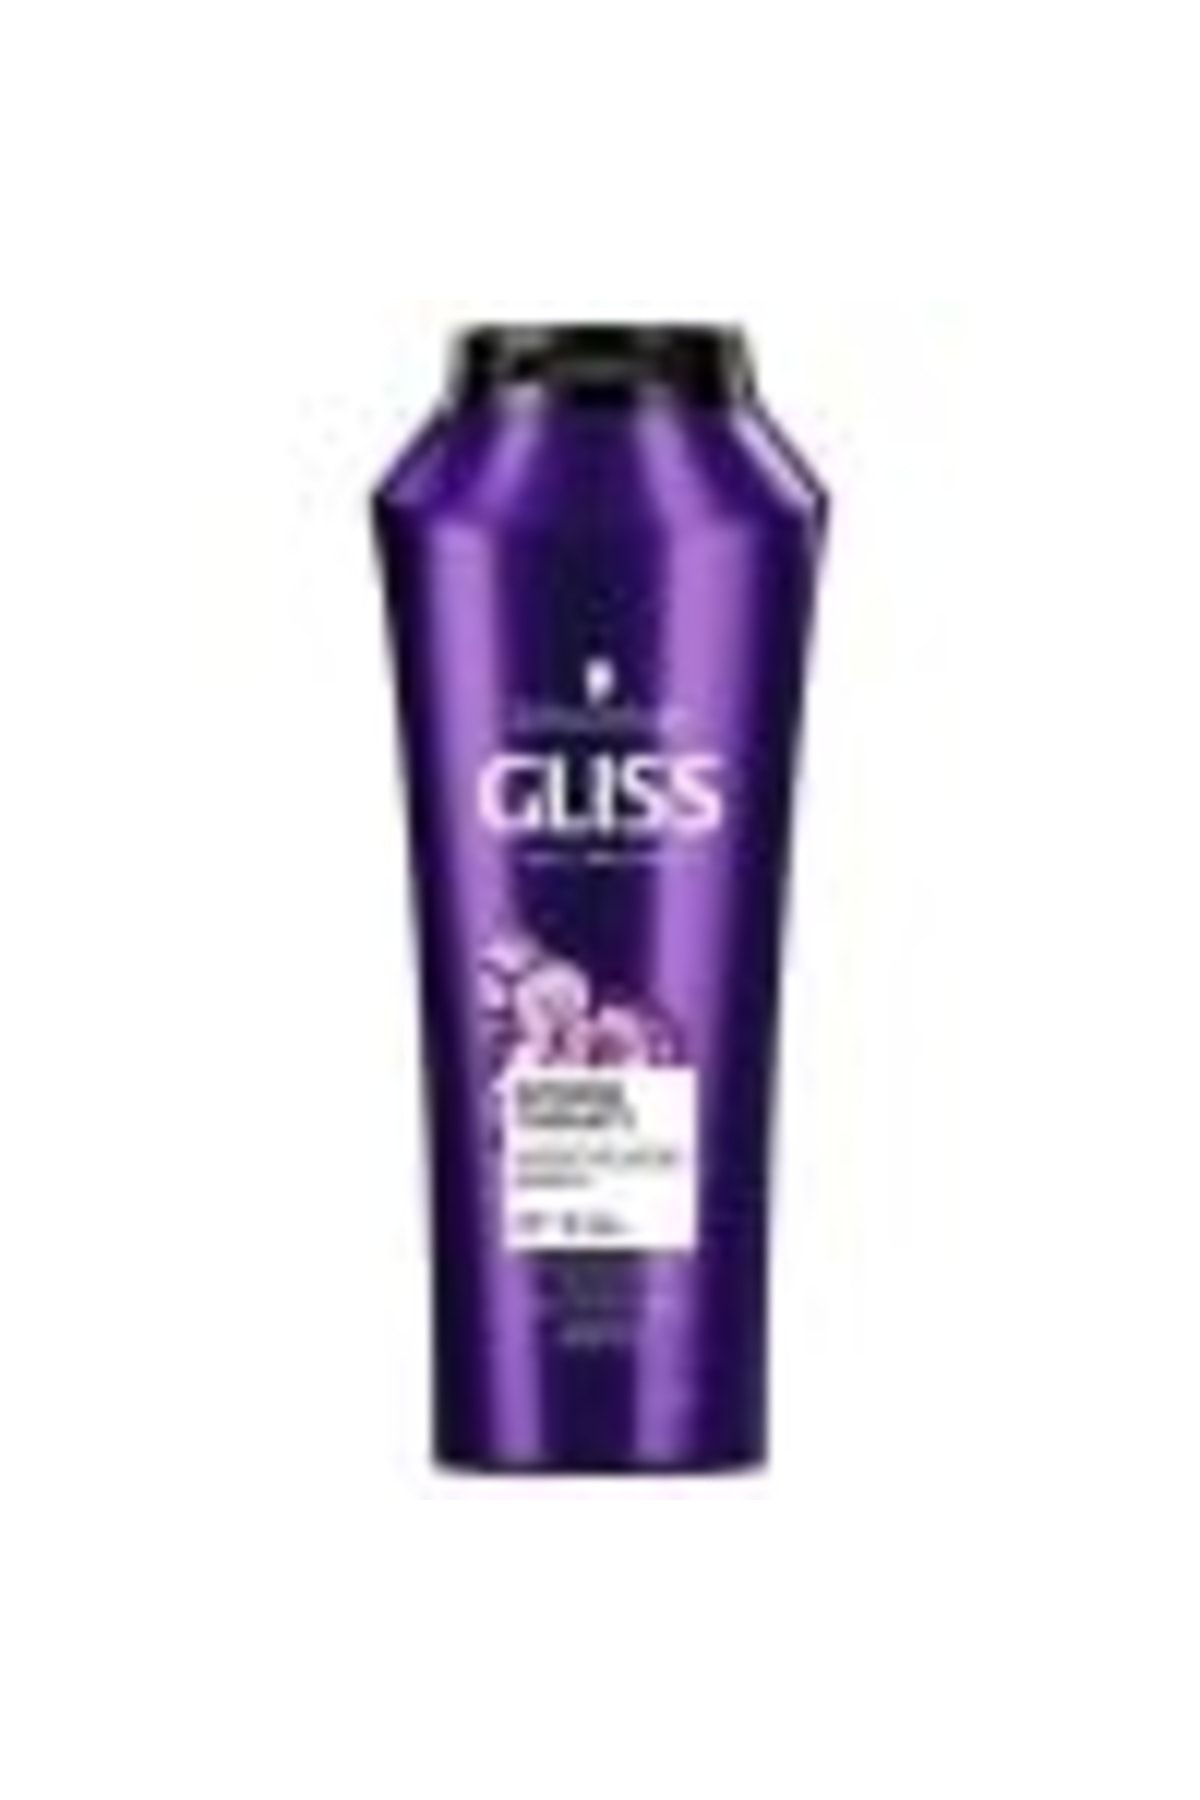 Gliss Intense Therapy Şampuan 500 Ml